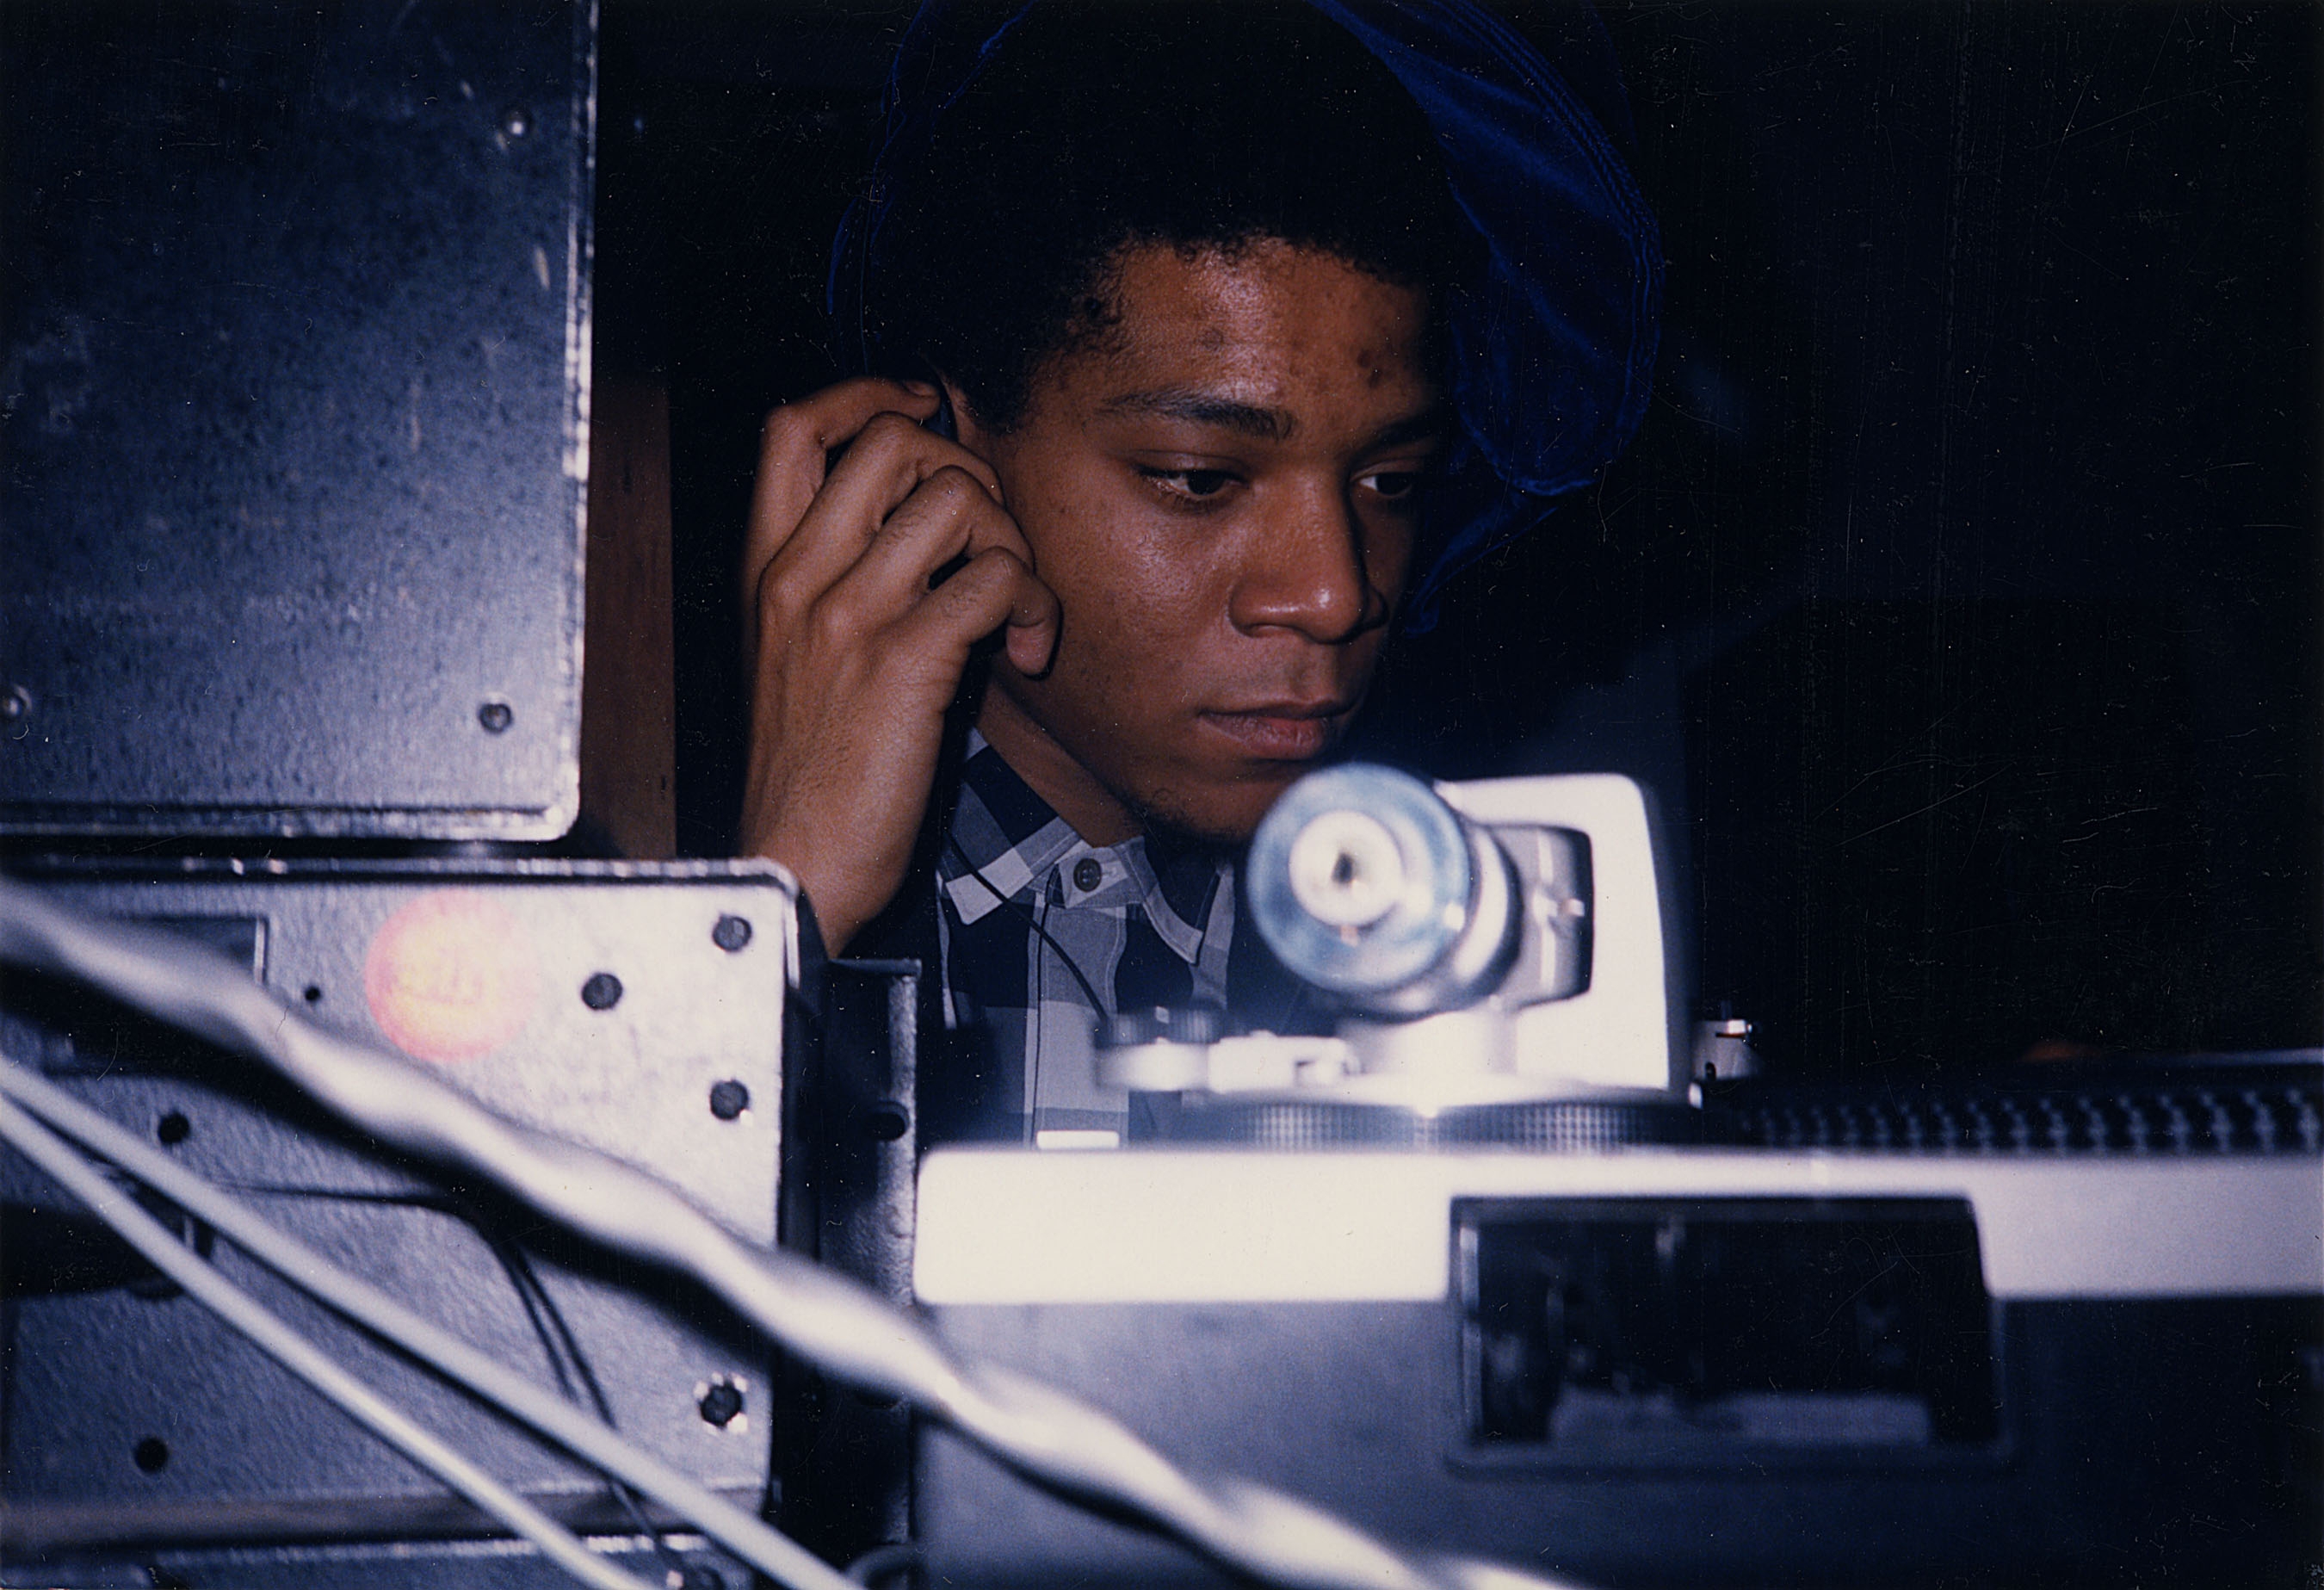 Jean-Michel Basquiat DJ-ing in the lounge at Area, 1986. Photograph by and courtesy of Johnny Dynell.